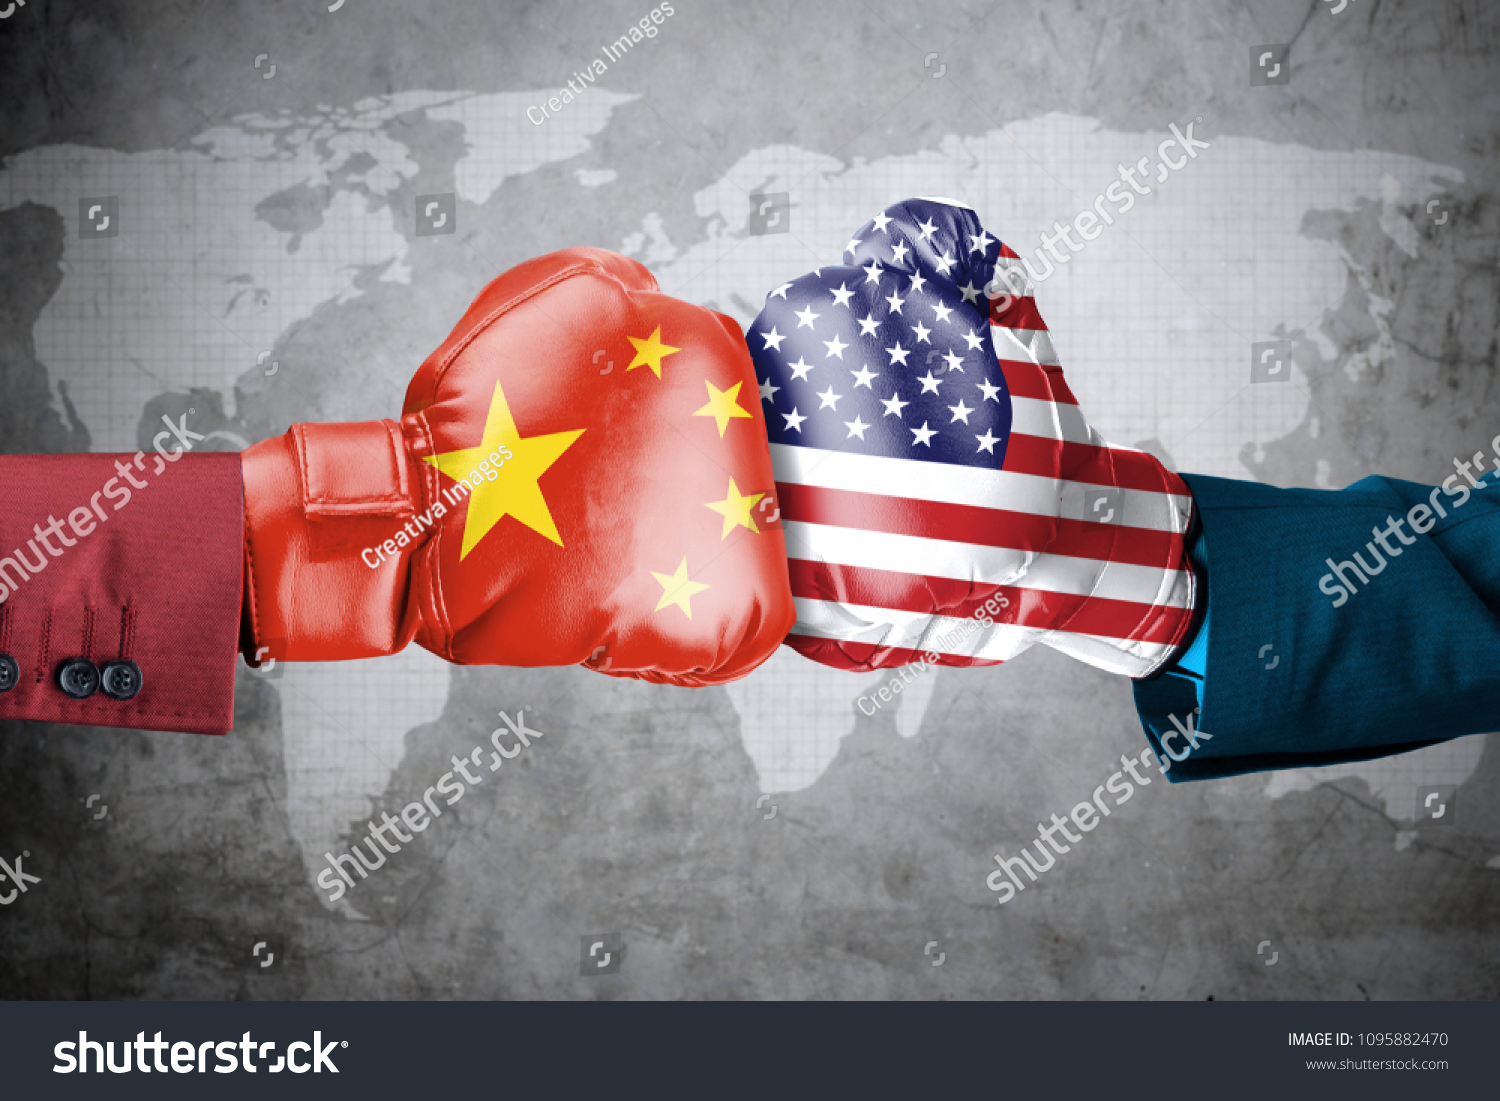 Concept of trade war between USA and China. Two hands of wearing boxing gloves with China and USA flag over world map #1095882470